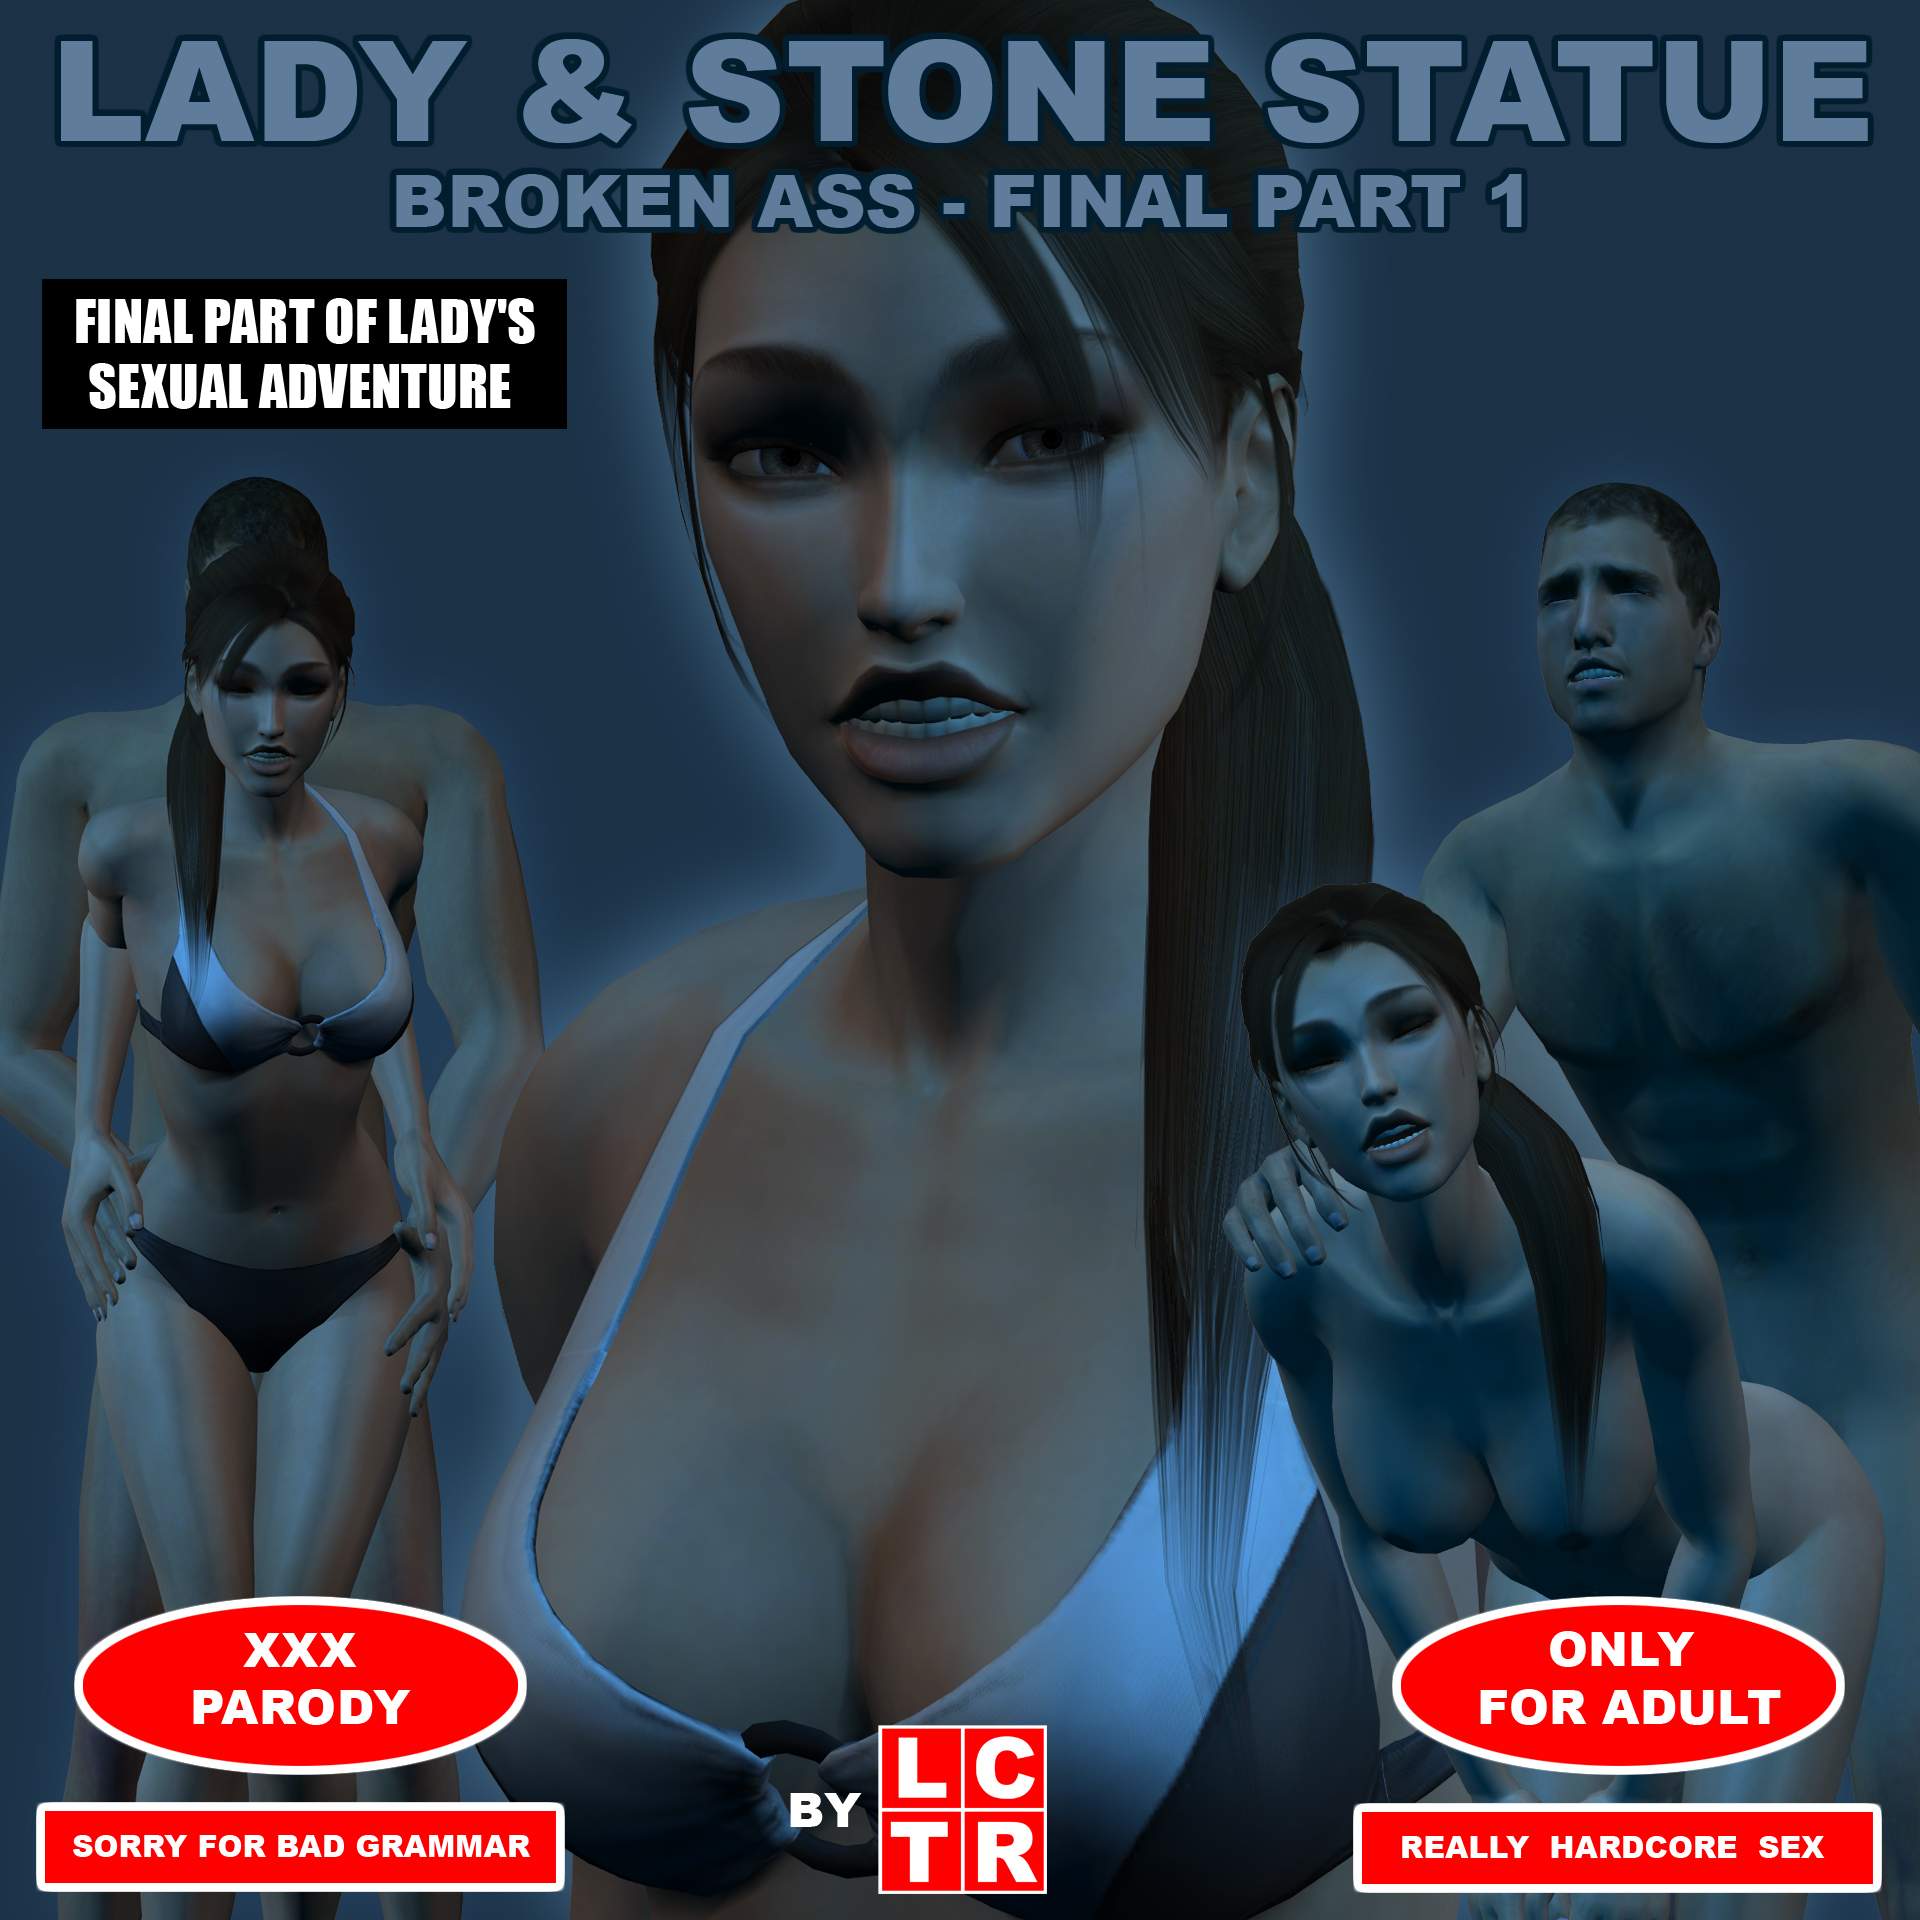 SureFap xxx porno Tomb Raider - [lctr] - Lady & Stone Statue 6 - #3 Broken Ass - Final Part 1 (I The Beginning and II Eye For Eye)